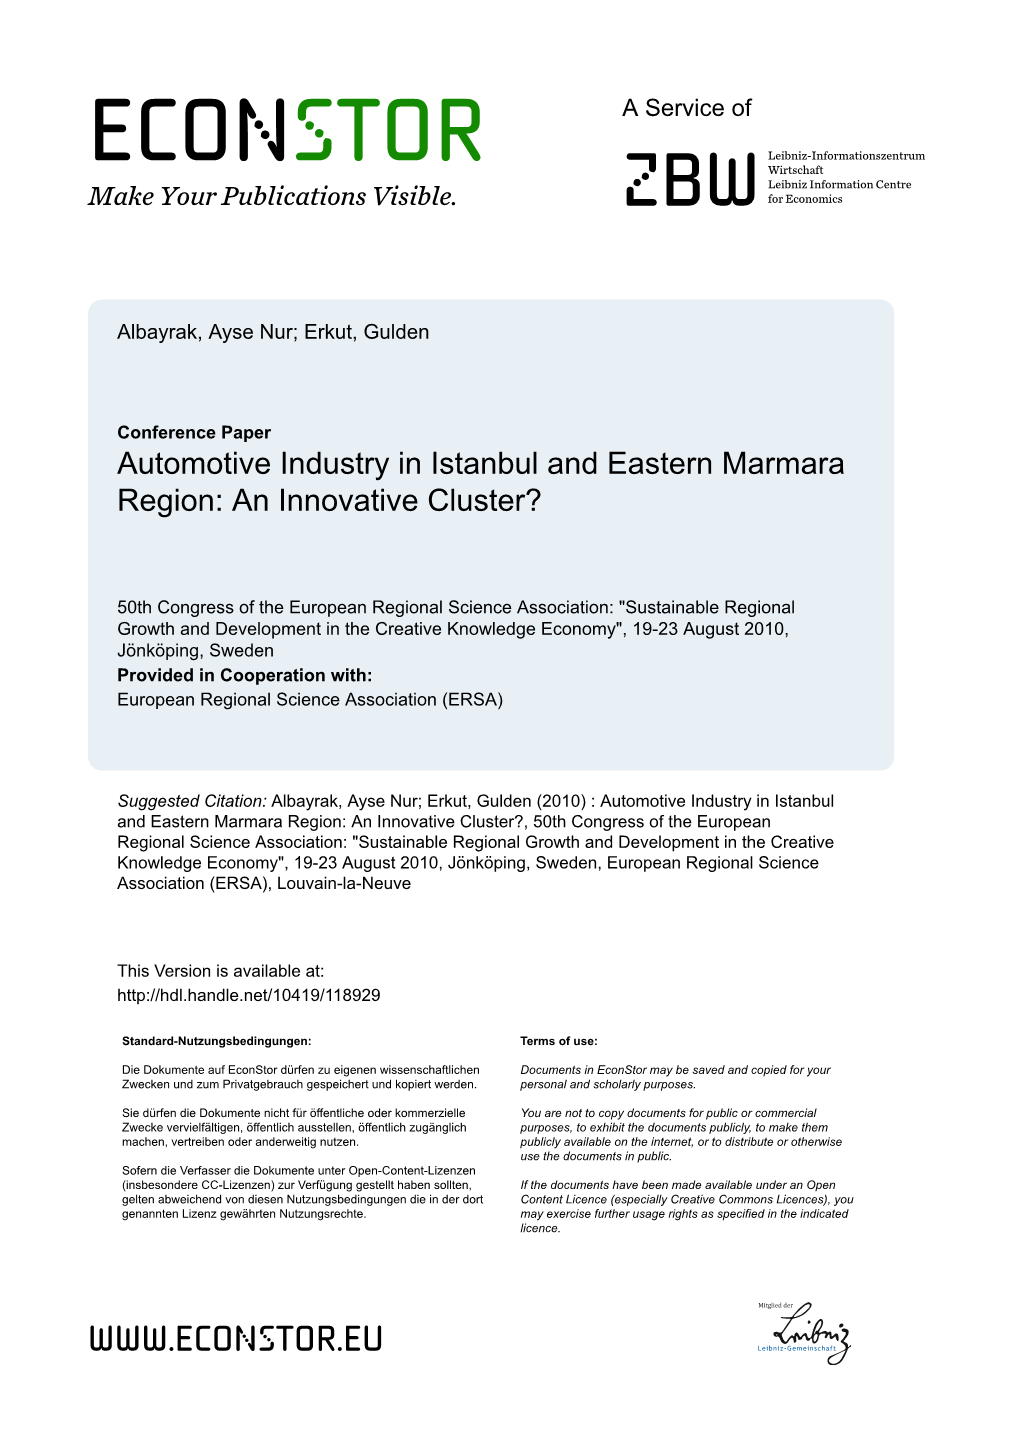 Automotive Industry in Istanbul and Eastern Marmara Region: an Innovative Cluster?